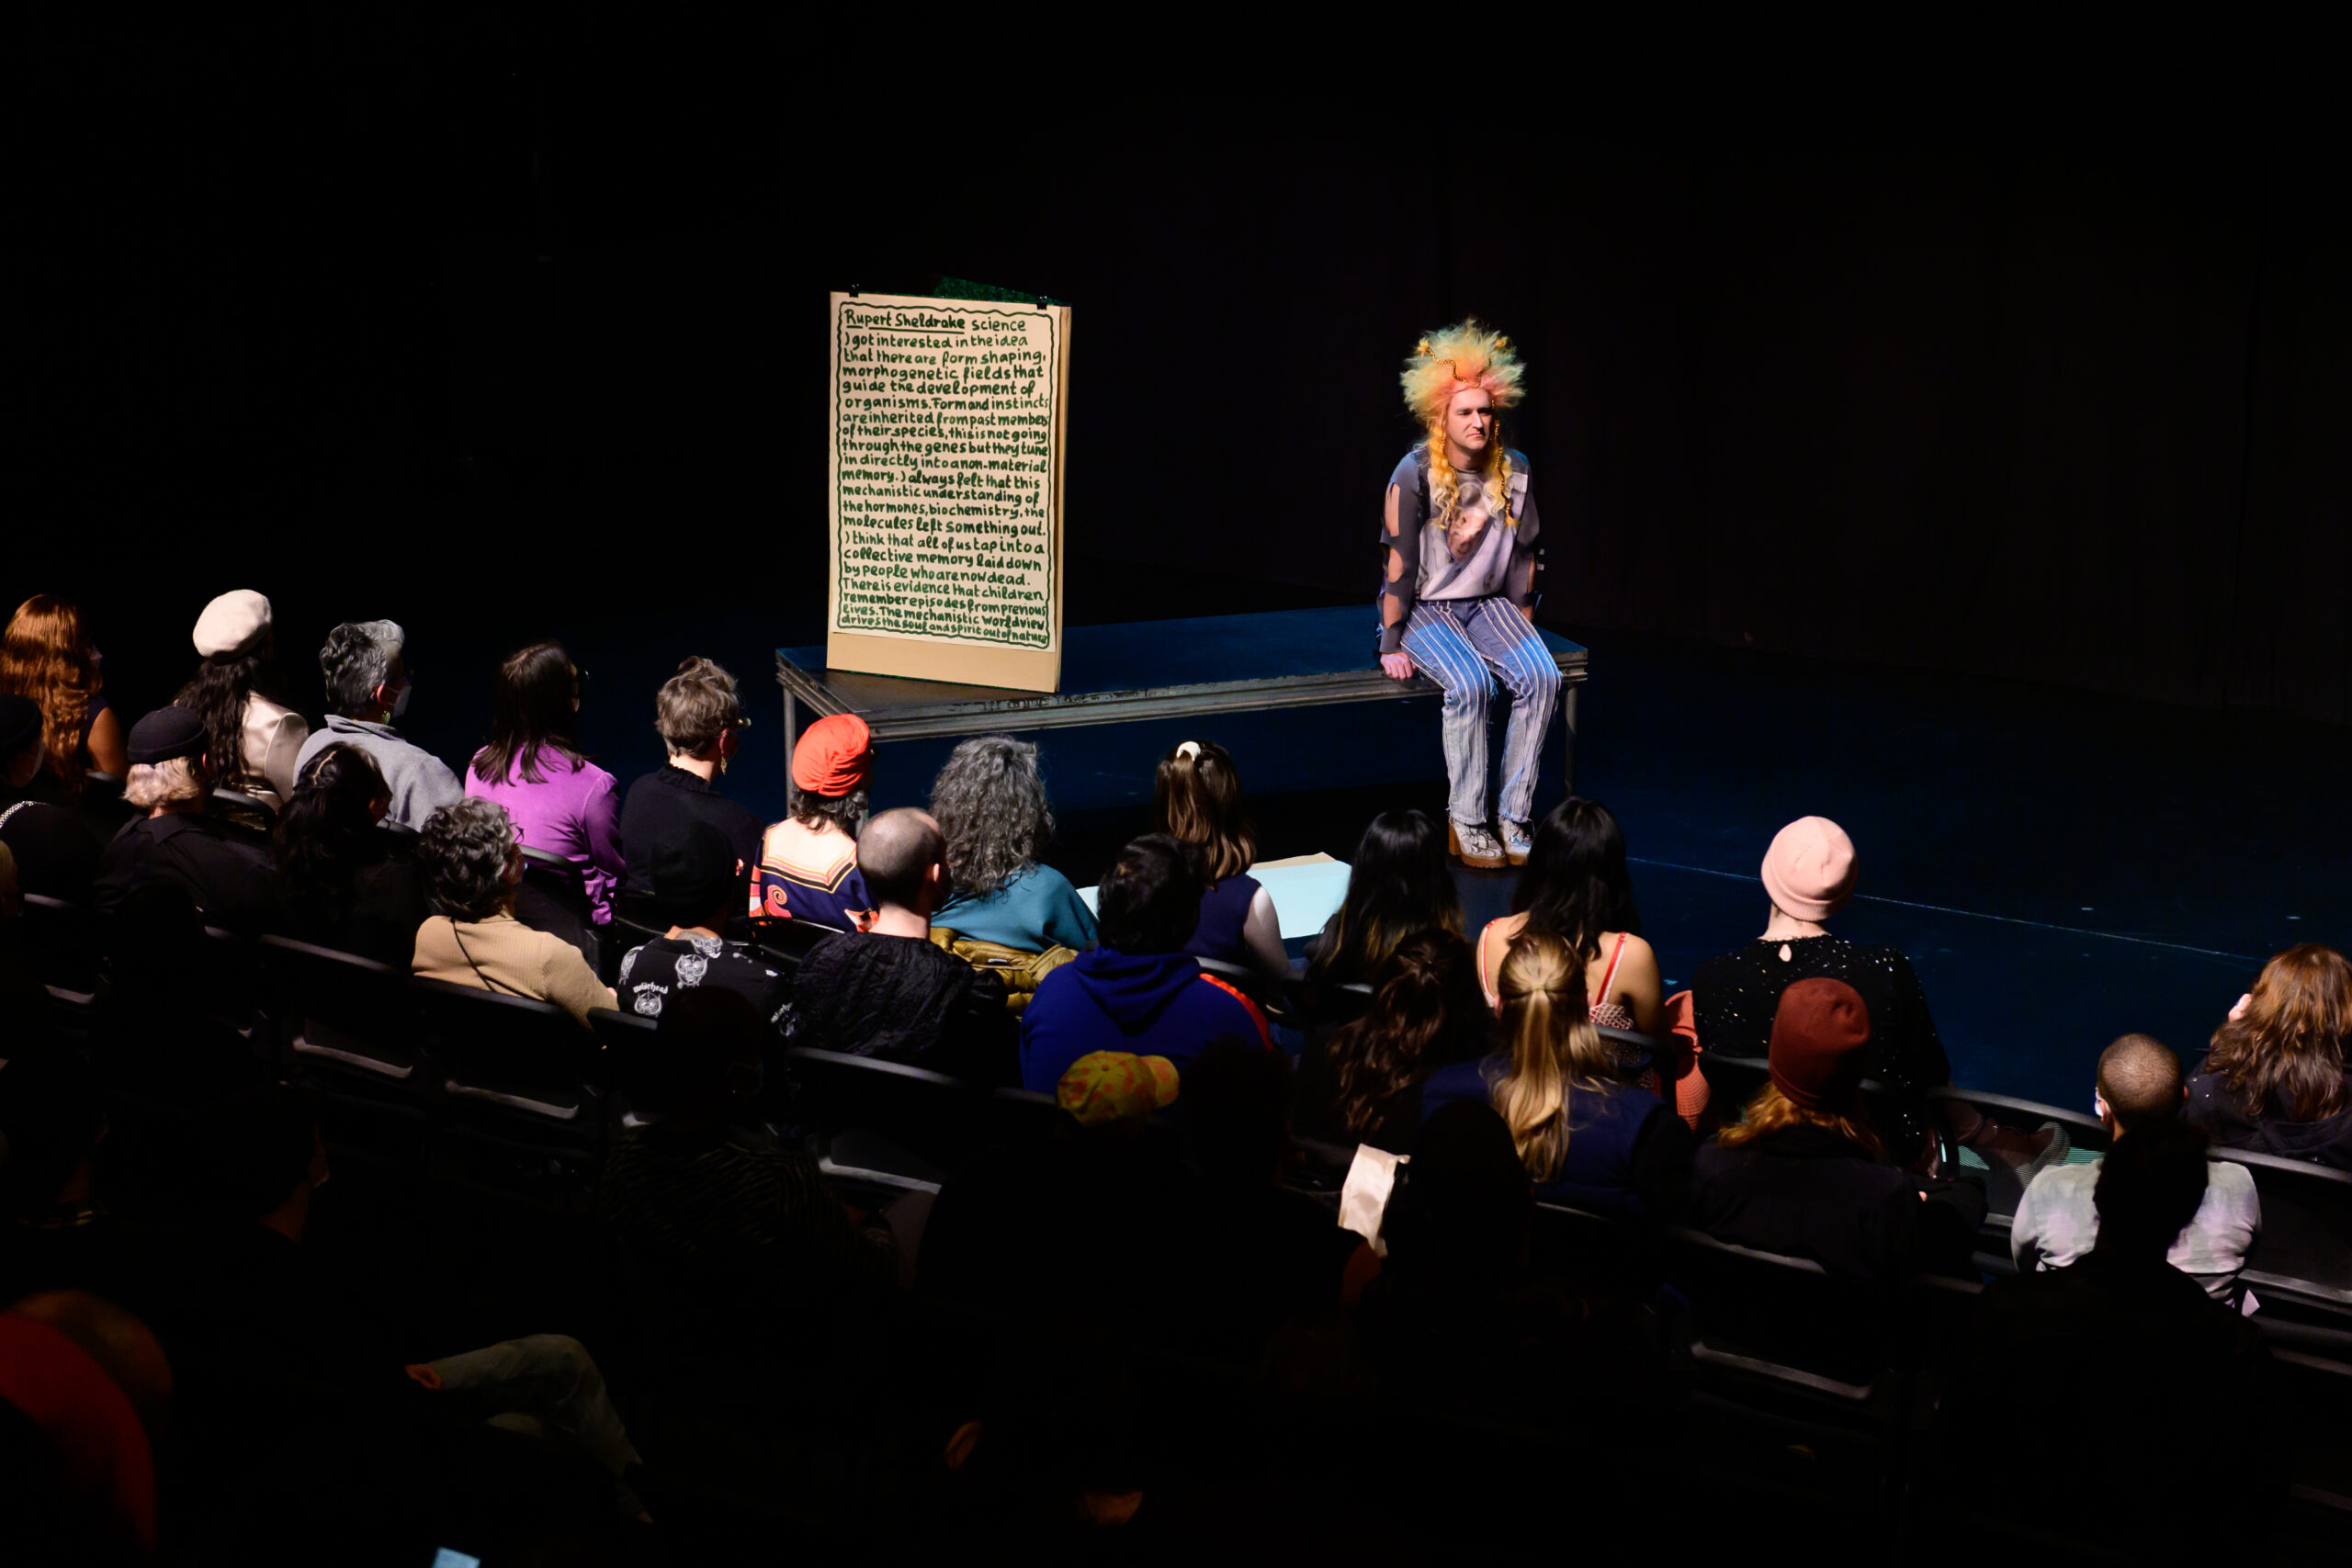 Image of Publik Universal Frxnd sitting on a platform on stage in front of a seated audience. The Frxnd has a large orange wig on, with striped pants, boots and a shirt with ripped long sleeves. A large piece of chart paper with writing in green marker sits on the platform with them.